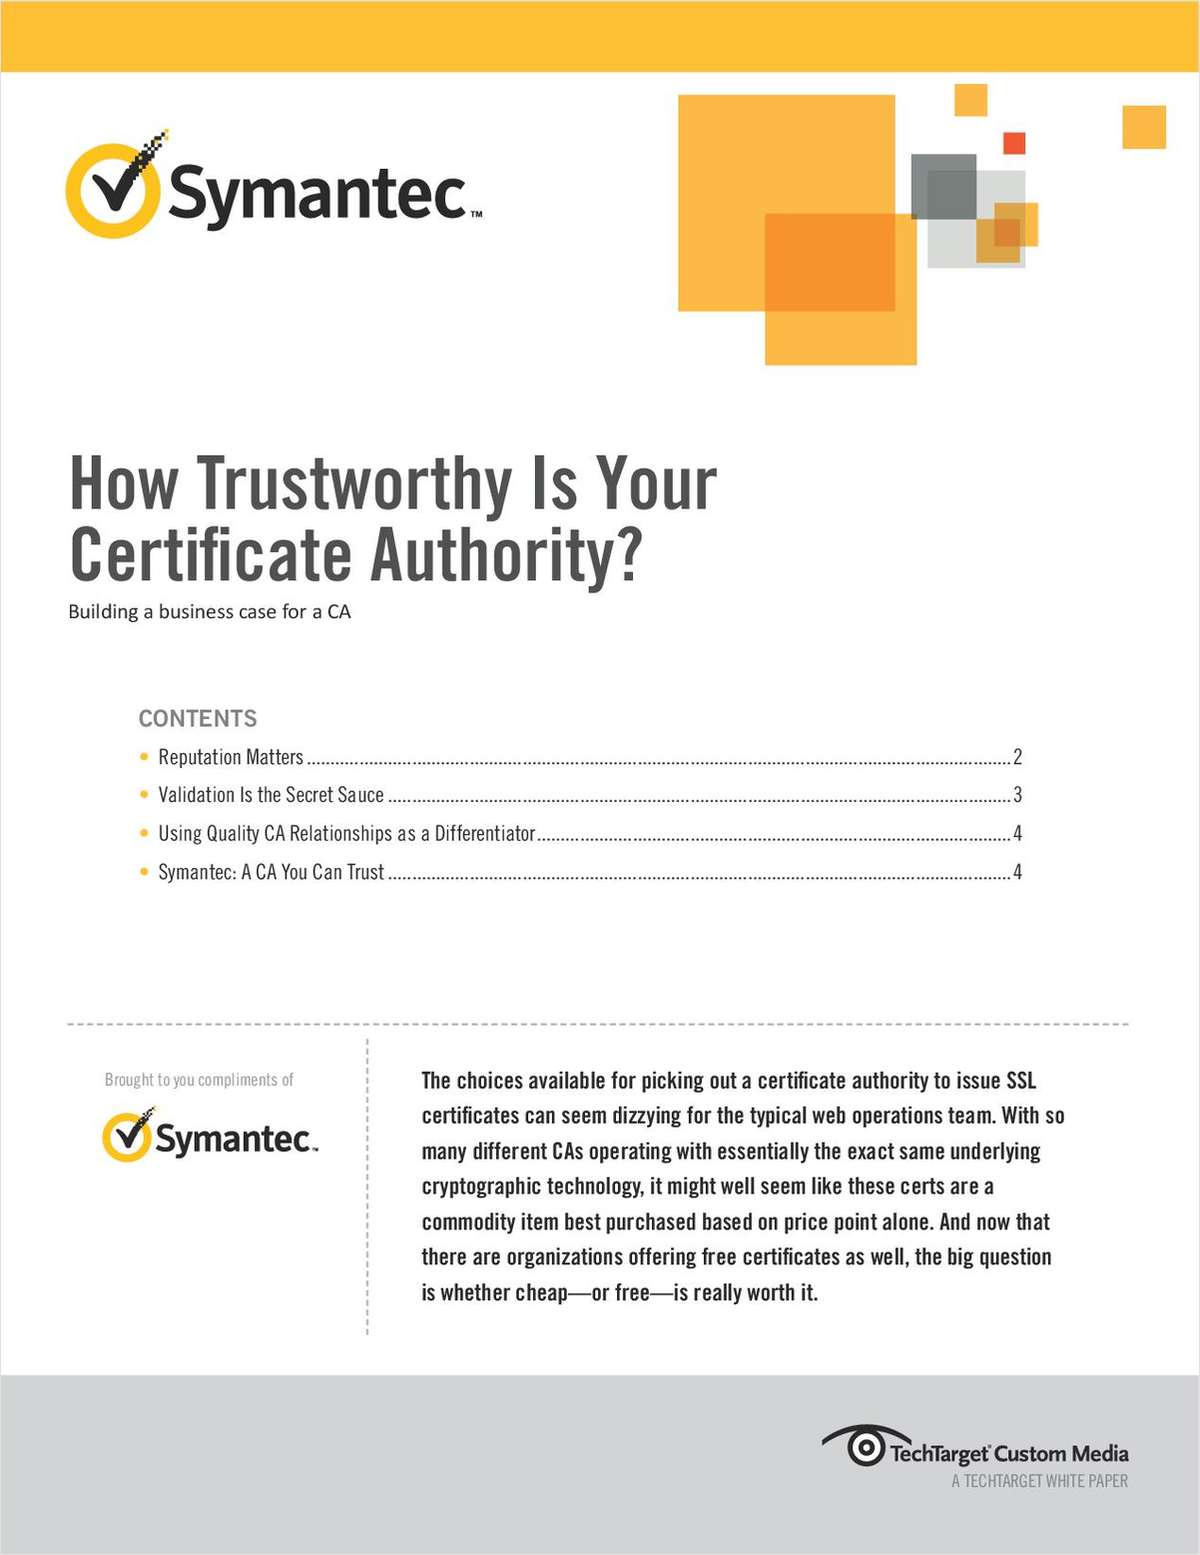 How Trustworthy Is Your Certificate Authority?